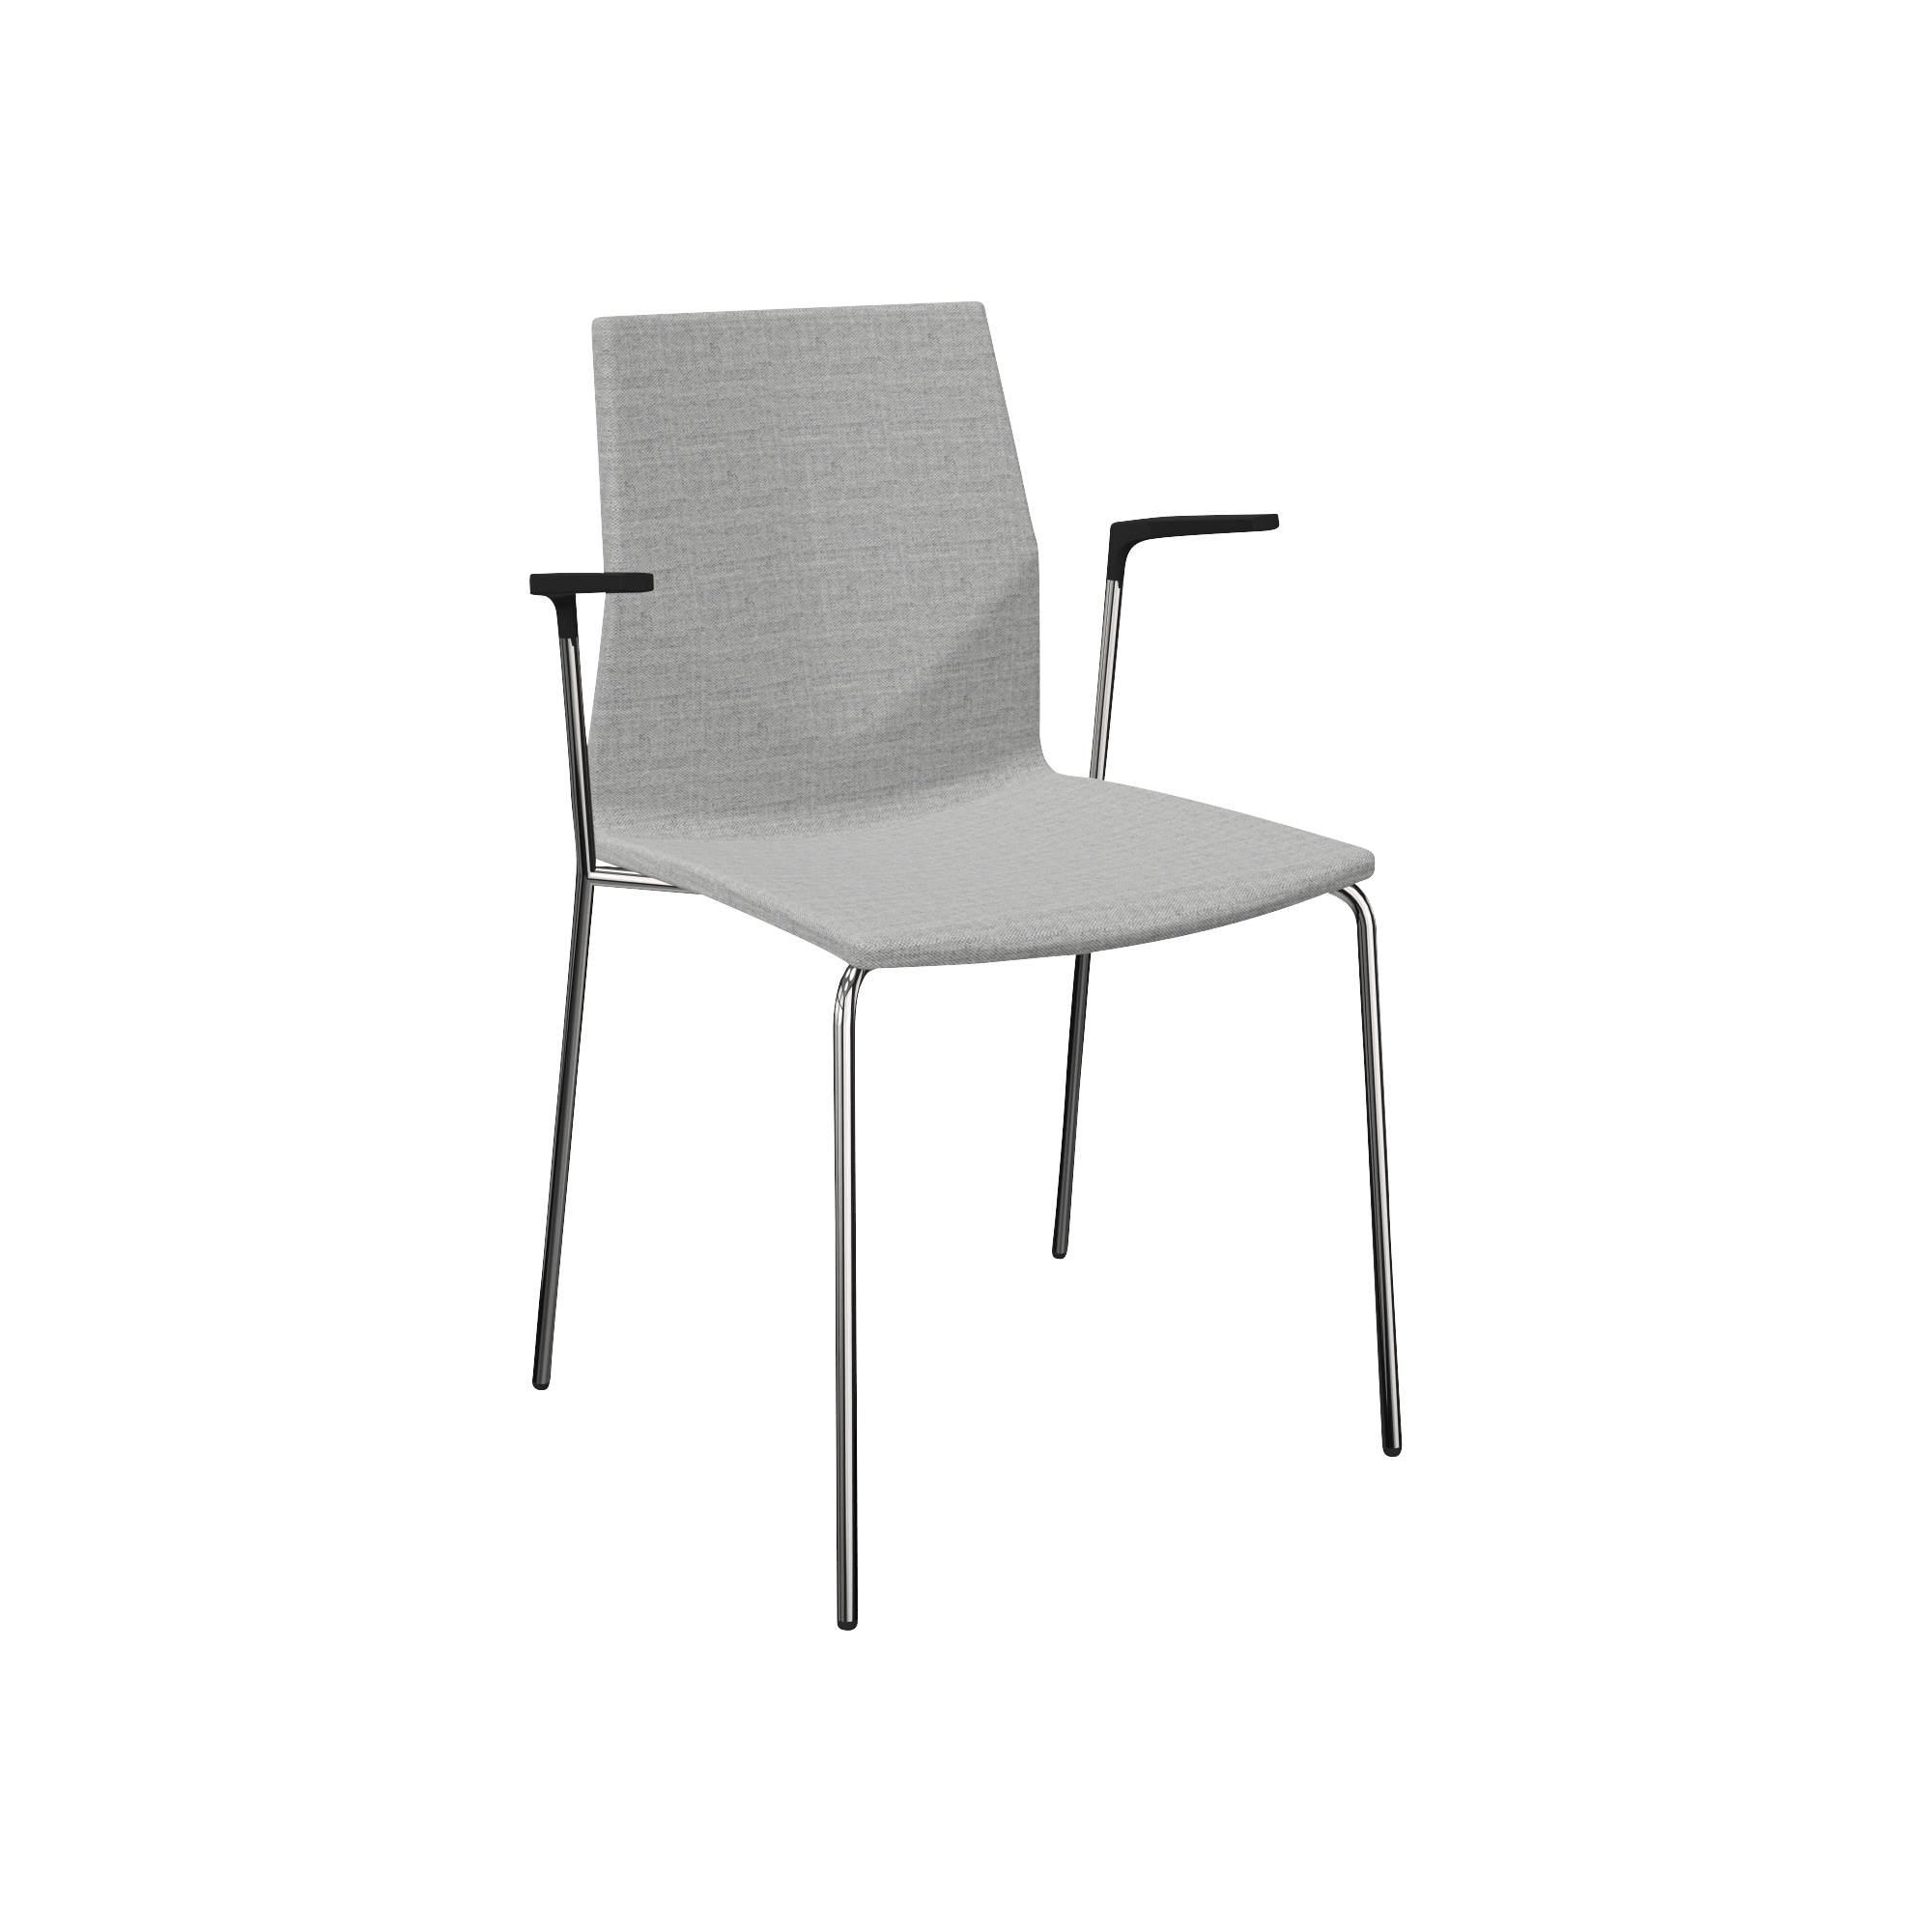 grey chair with metal legs and arm rests